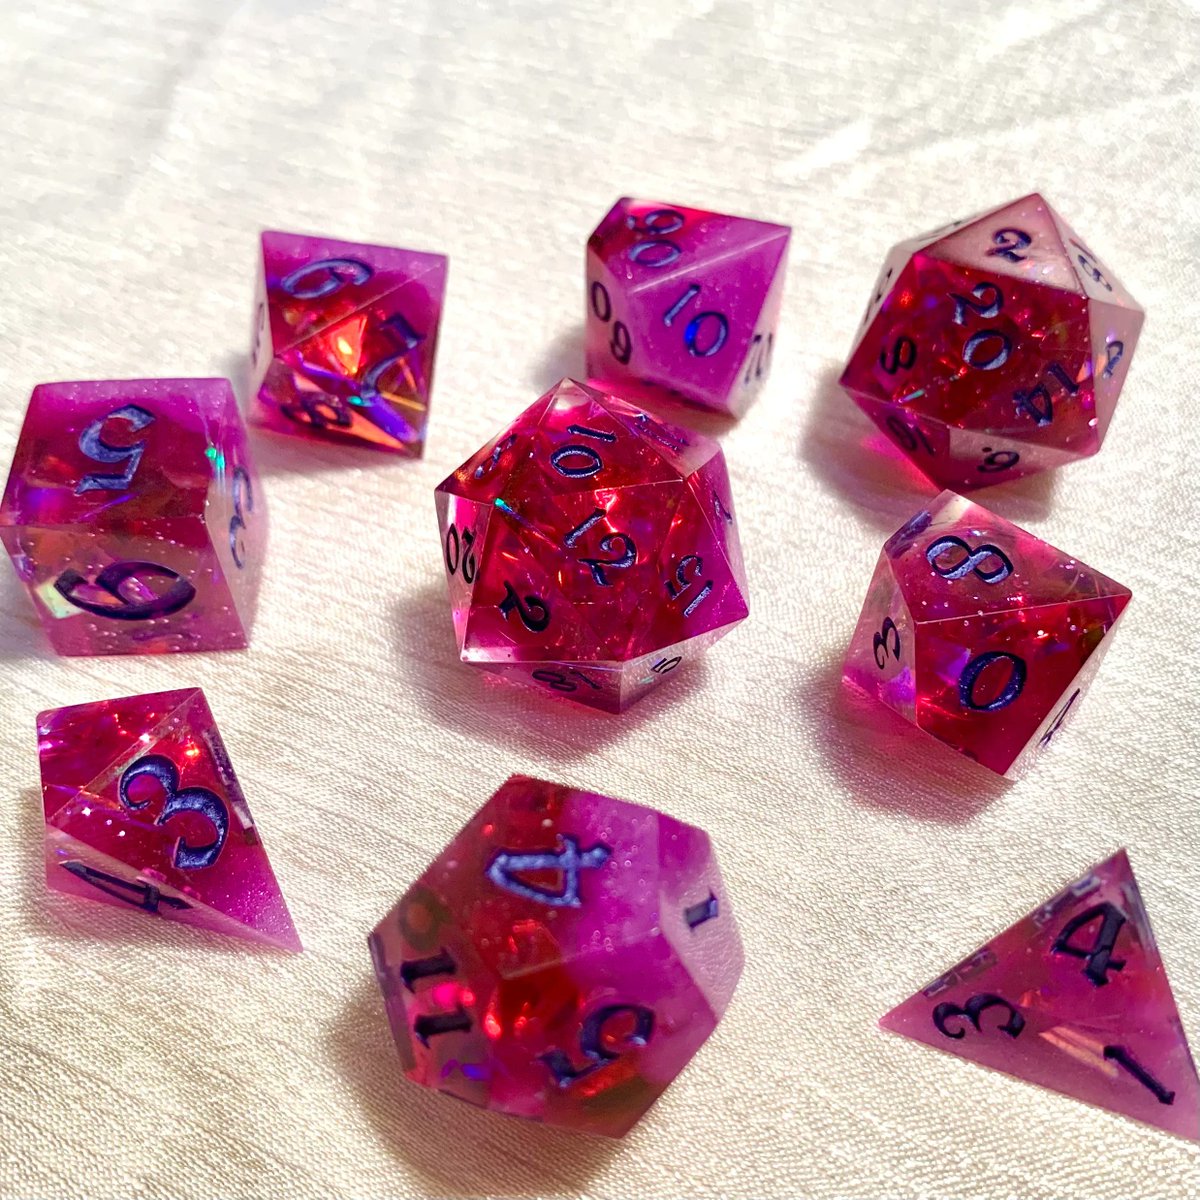 New dice set: The Lightning Within' is now up on the website at $25 for a limited time! stardustdice.shop/product/the-li… #Gaming #Dice #LimitedTimeOffer #Sale #UnbeatablePrice #GetYoursNow